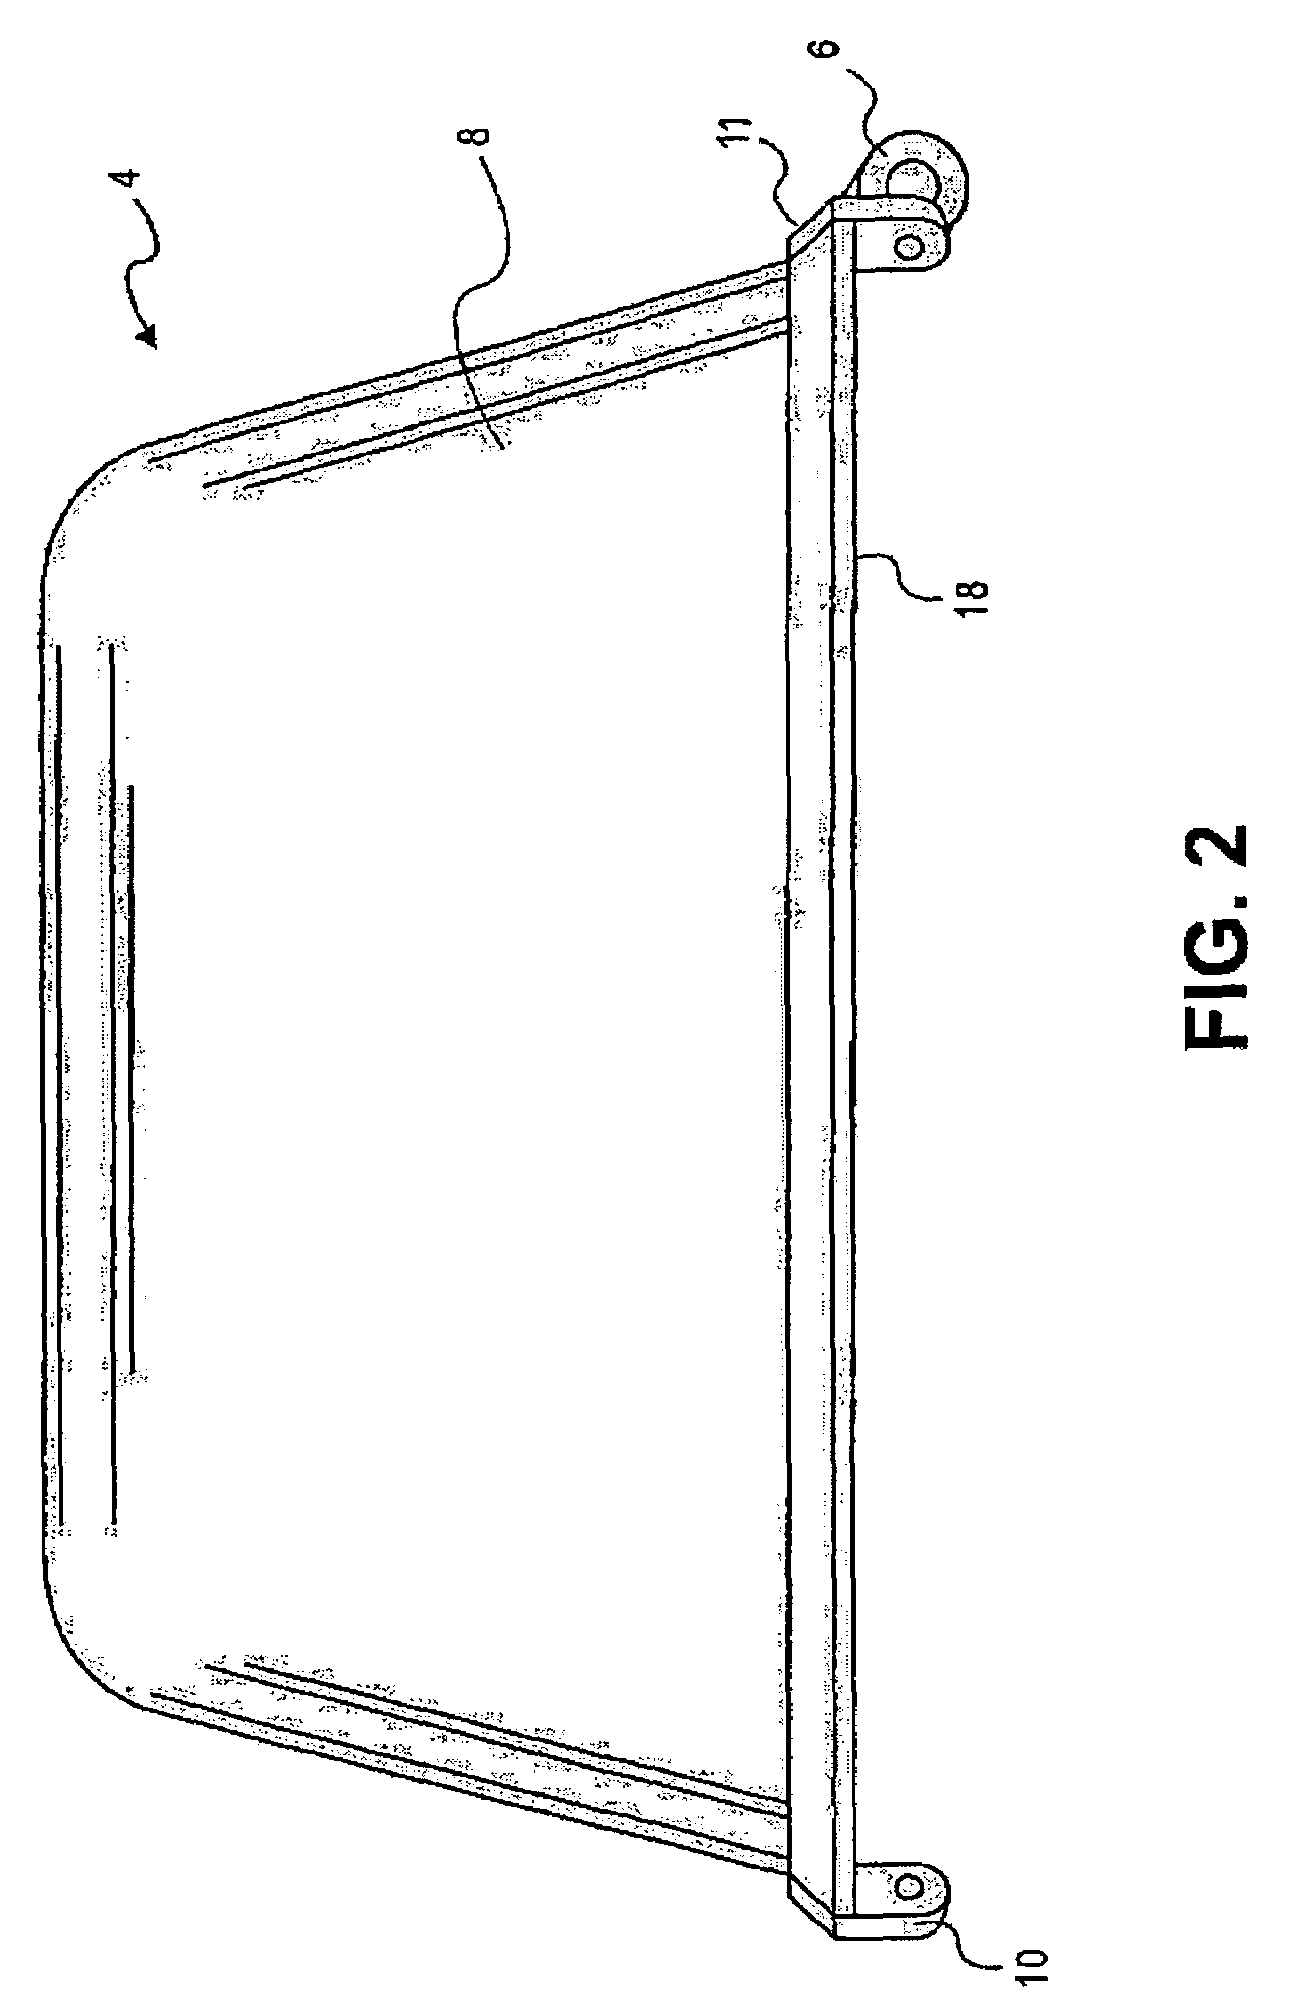 Horizontal and vertical in-use electrical device cover